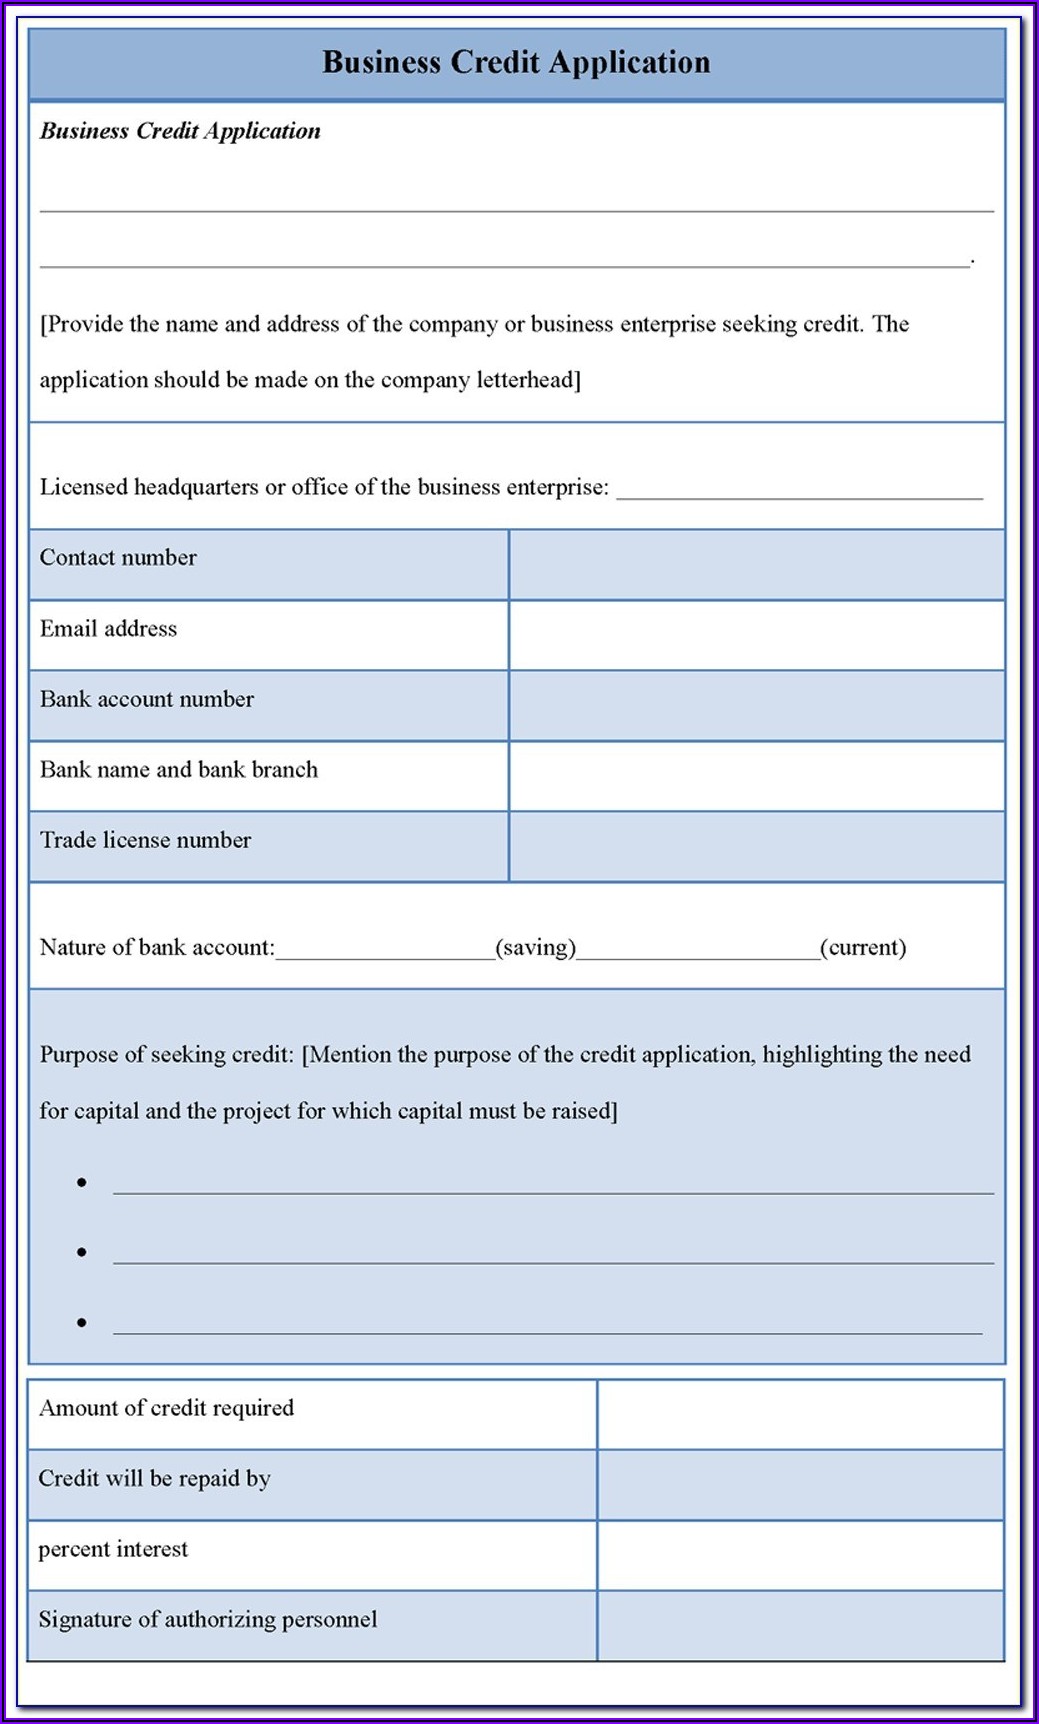 Business Credit Application Form Template South Africa